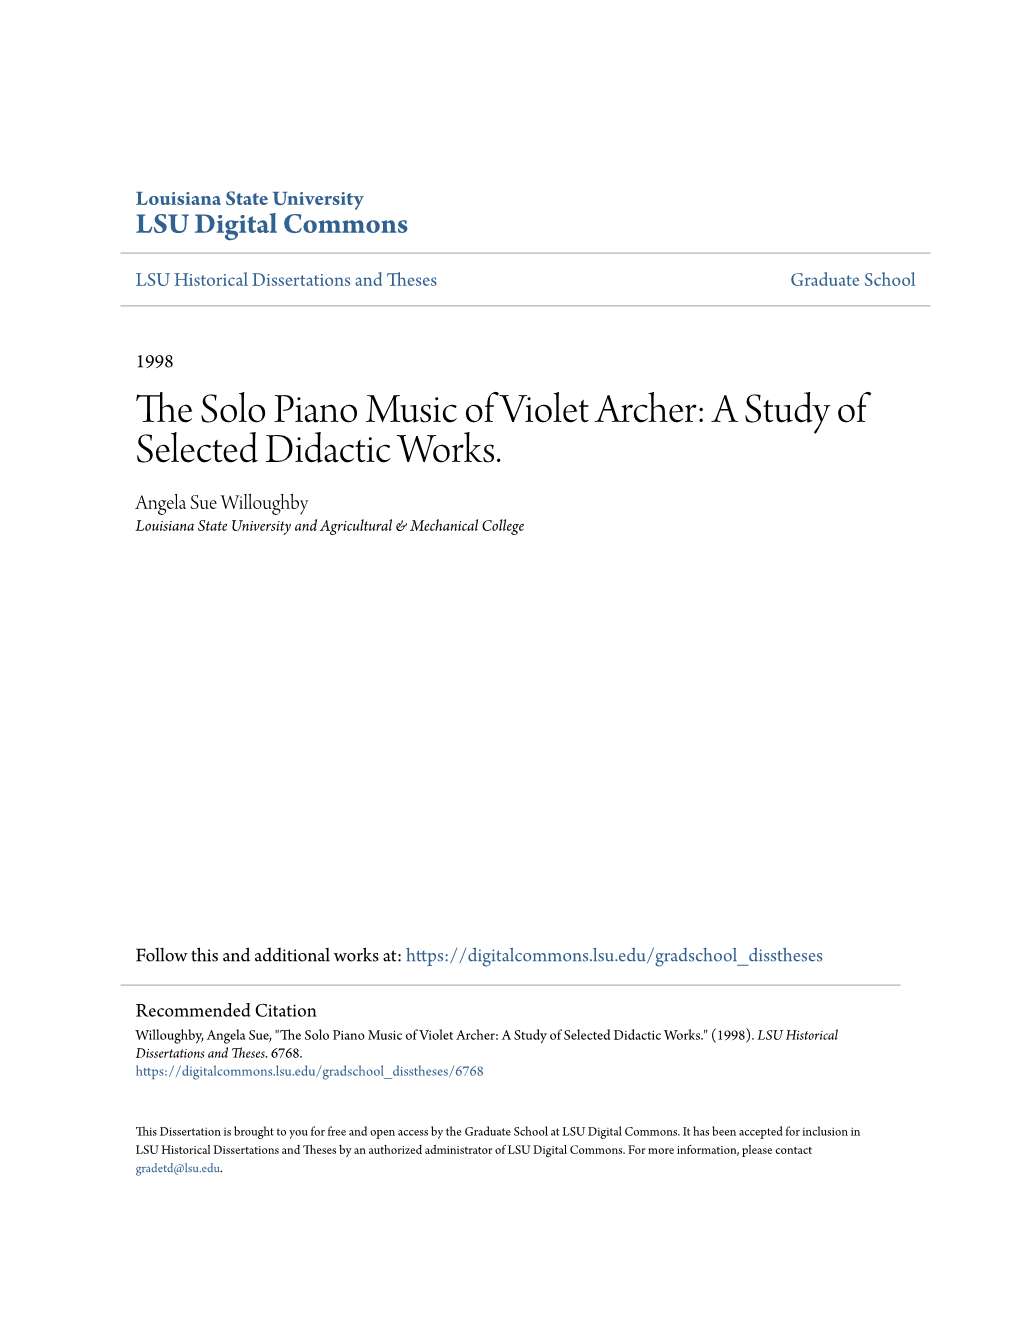 The Solo Piano Music of Violet Archer: a Study of Selected Didactic Works